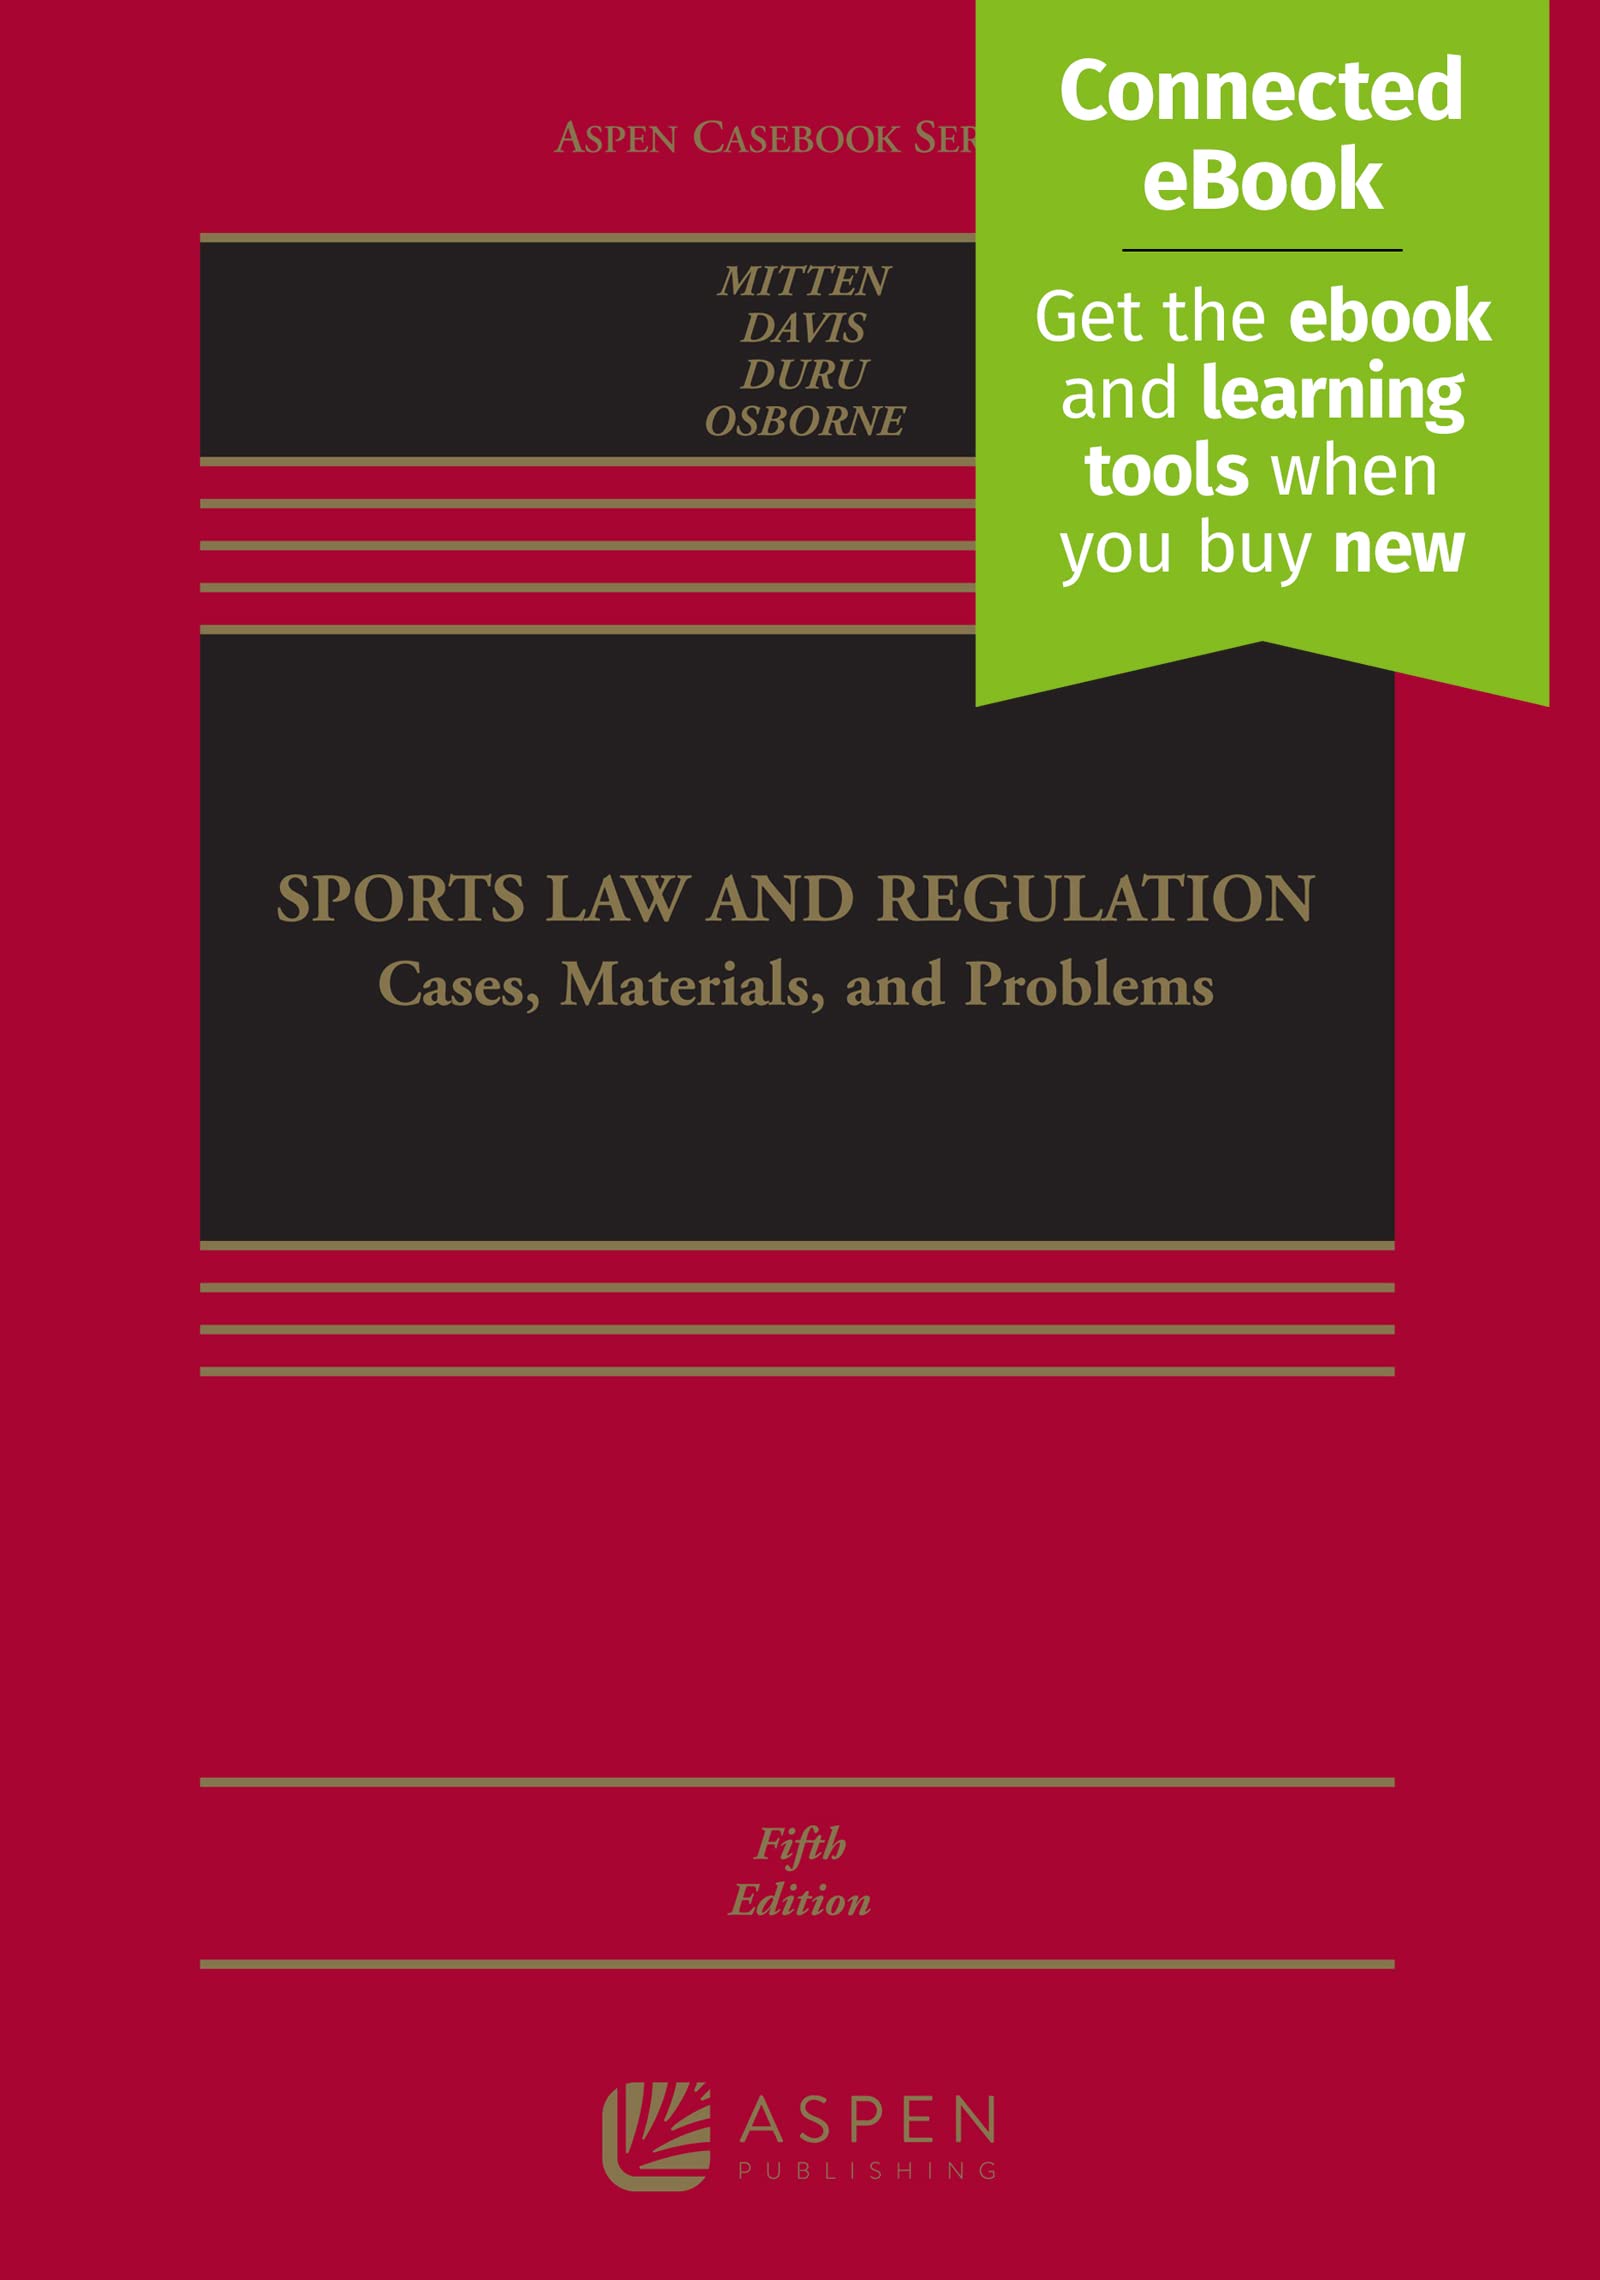 Sports Law and Regulation: Cases, Materials, and Problems [Connected eBook] (Aspen Casebook)